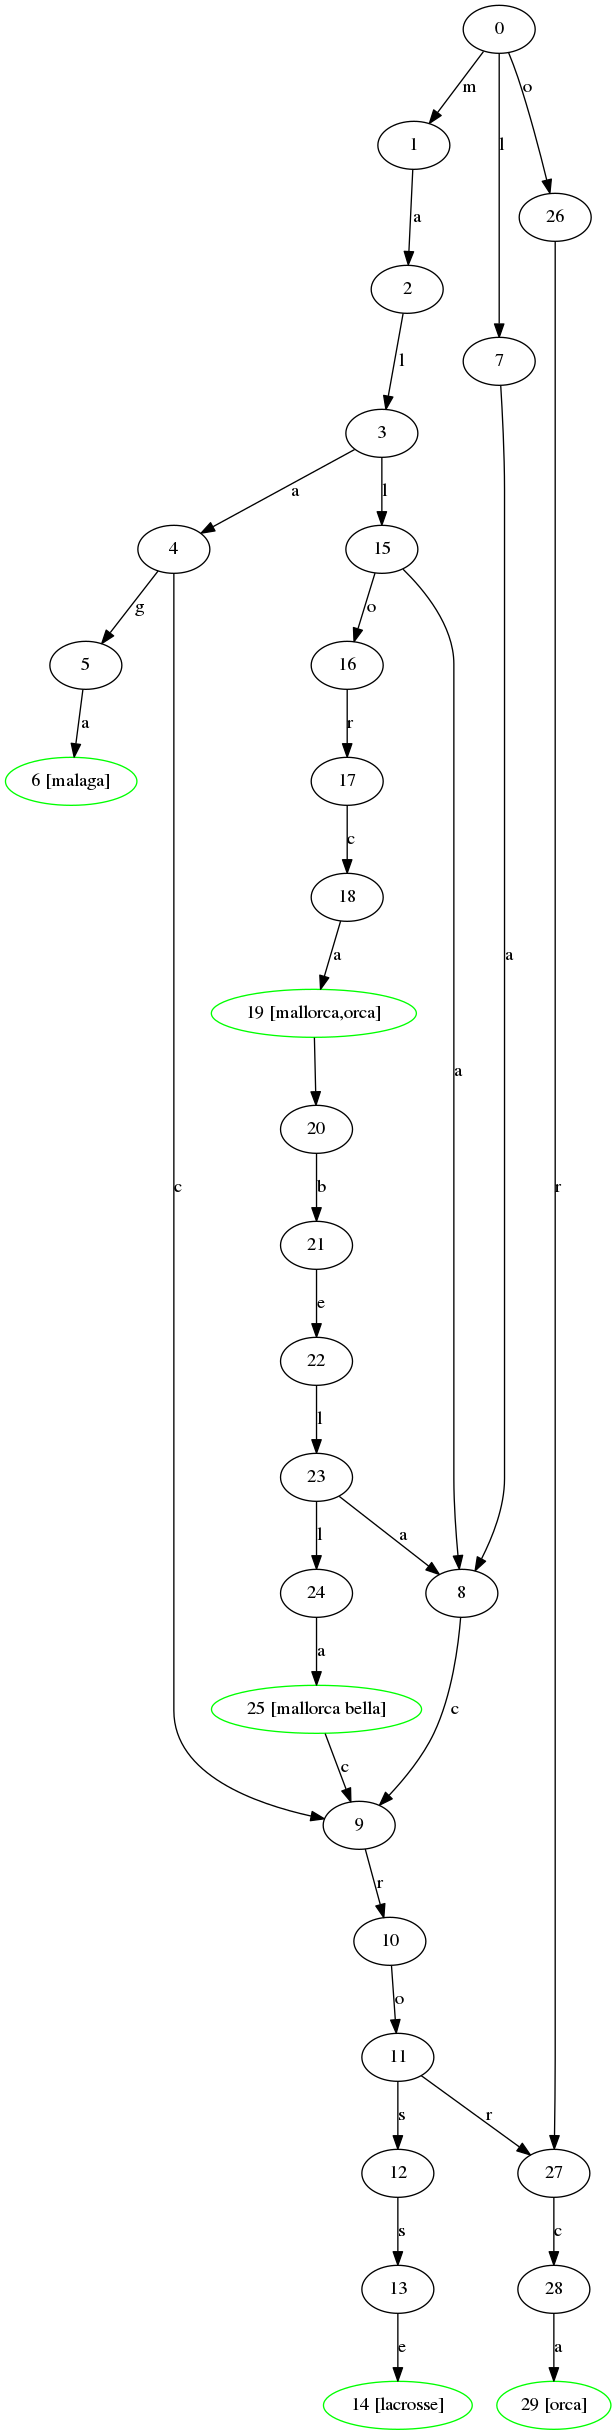 graph for kwtree